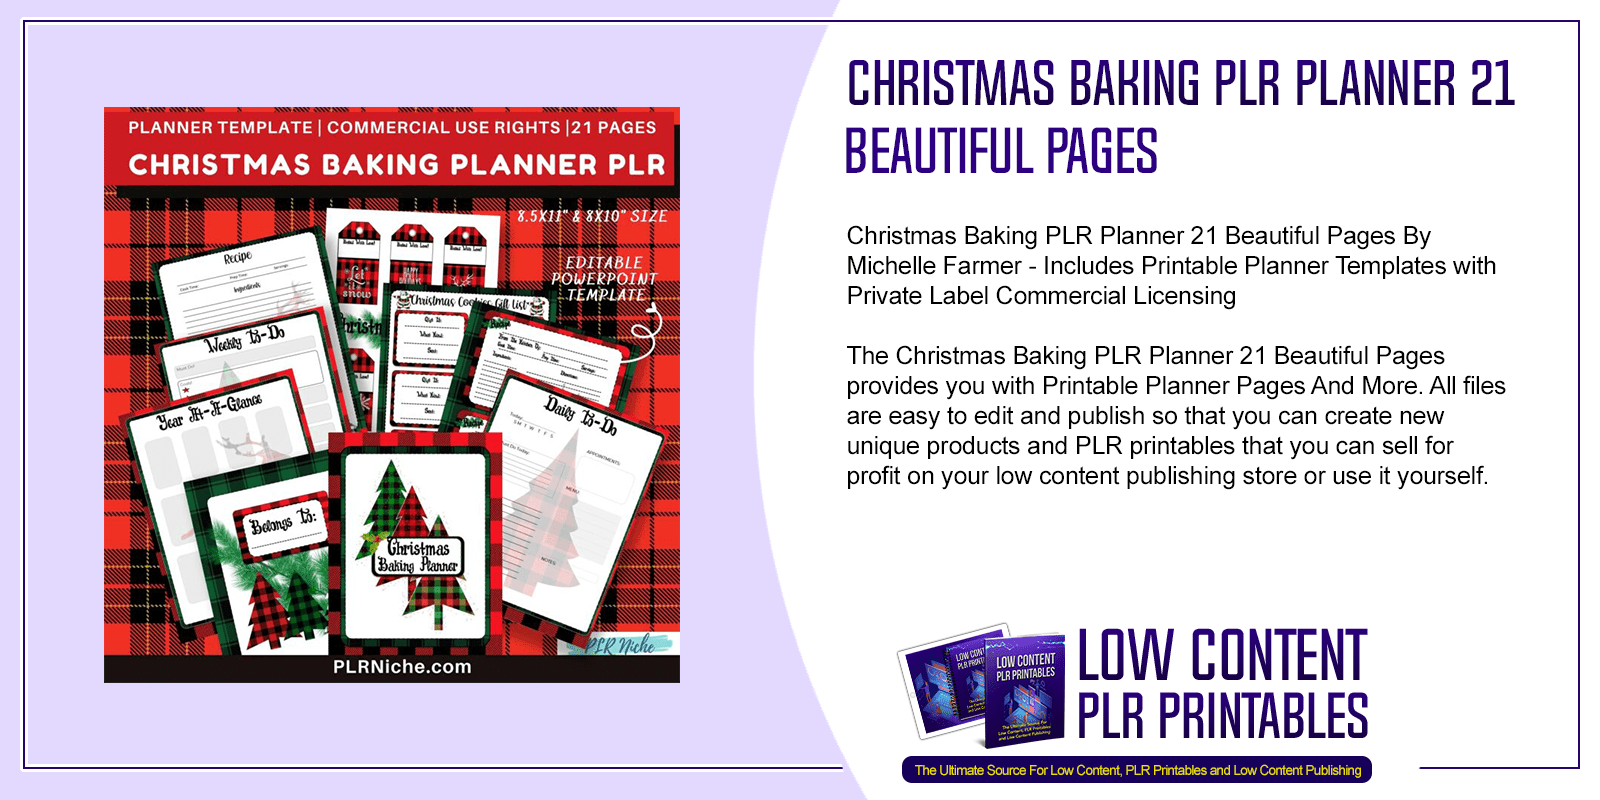 Christmas Baking PLR Planner 21 Beautiful Pages